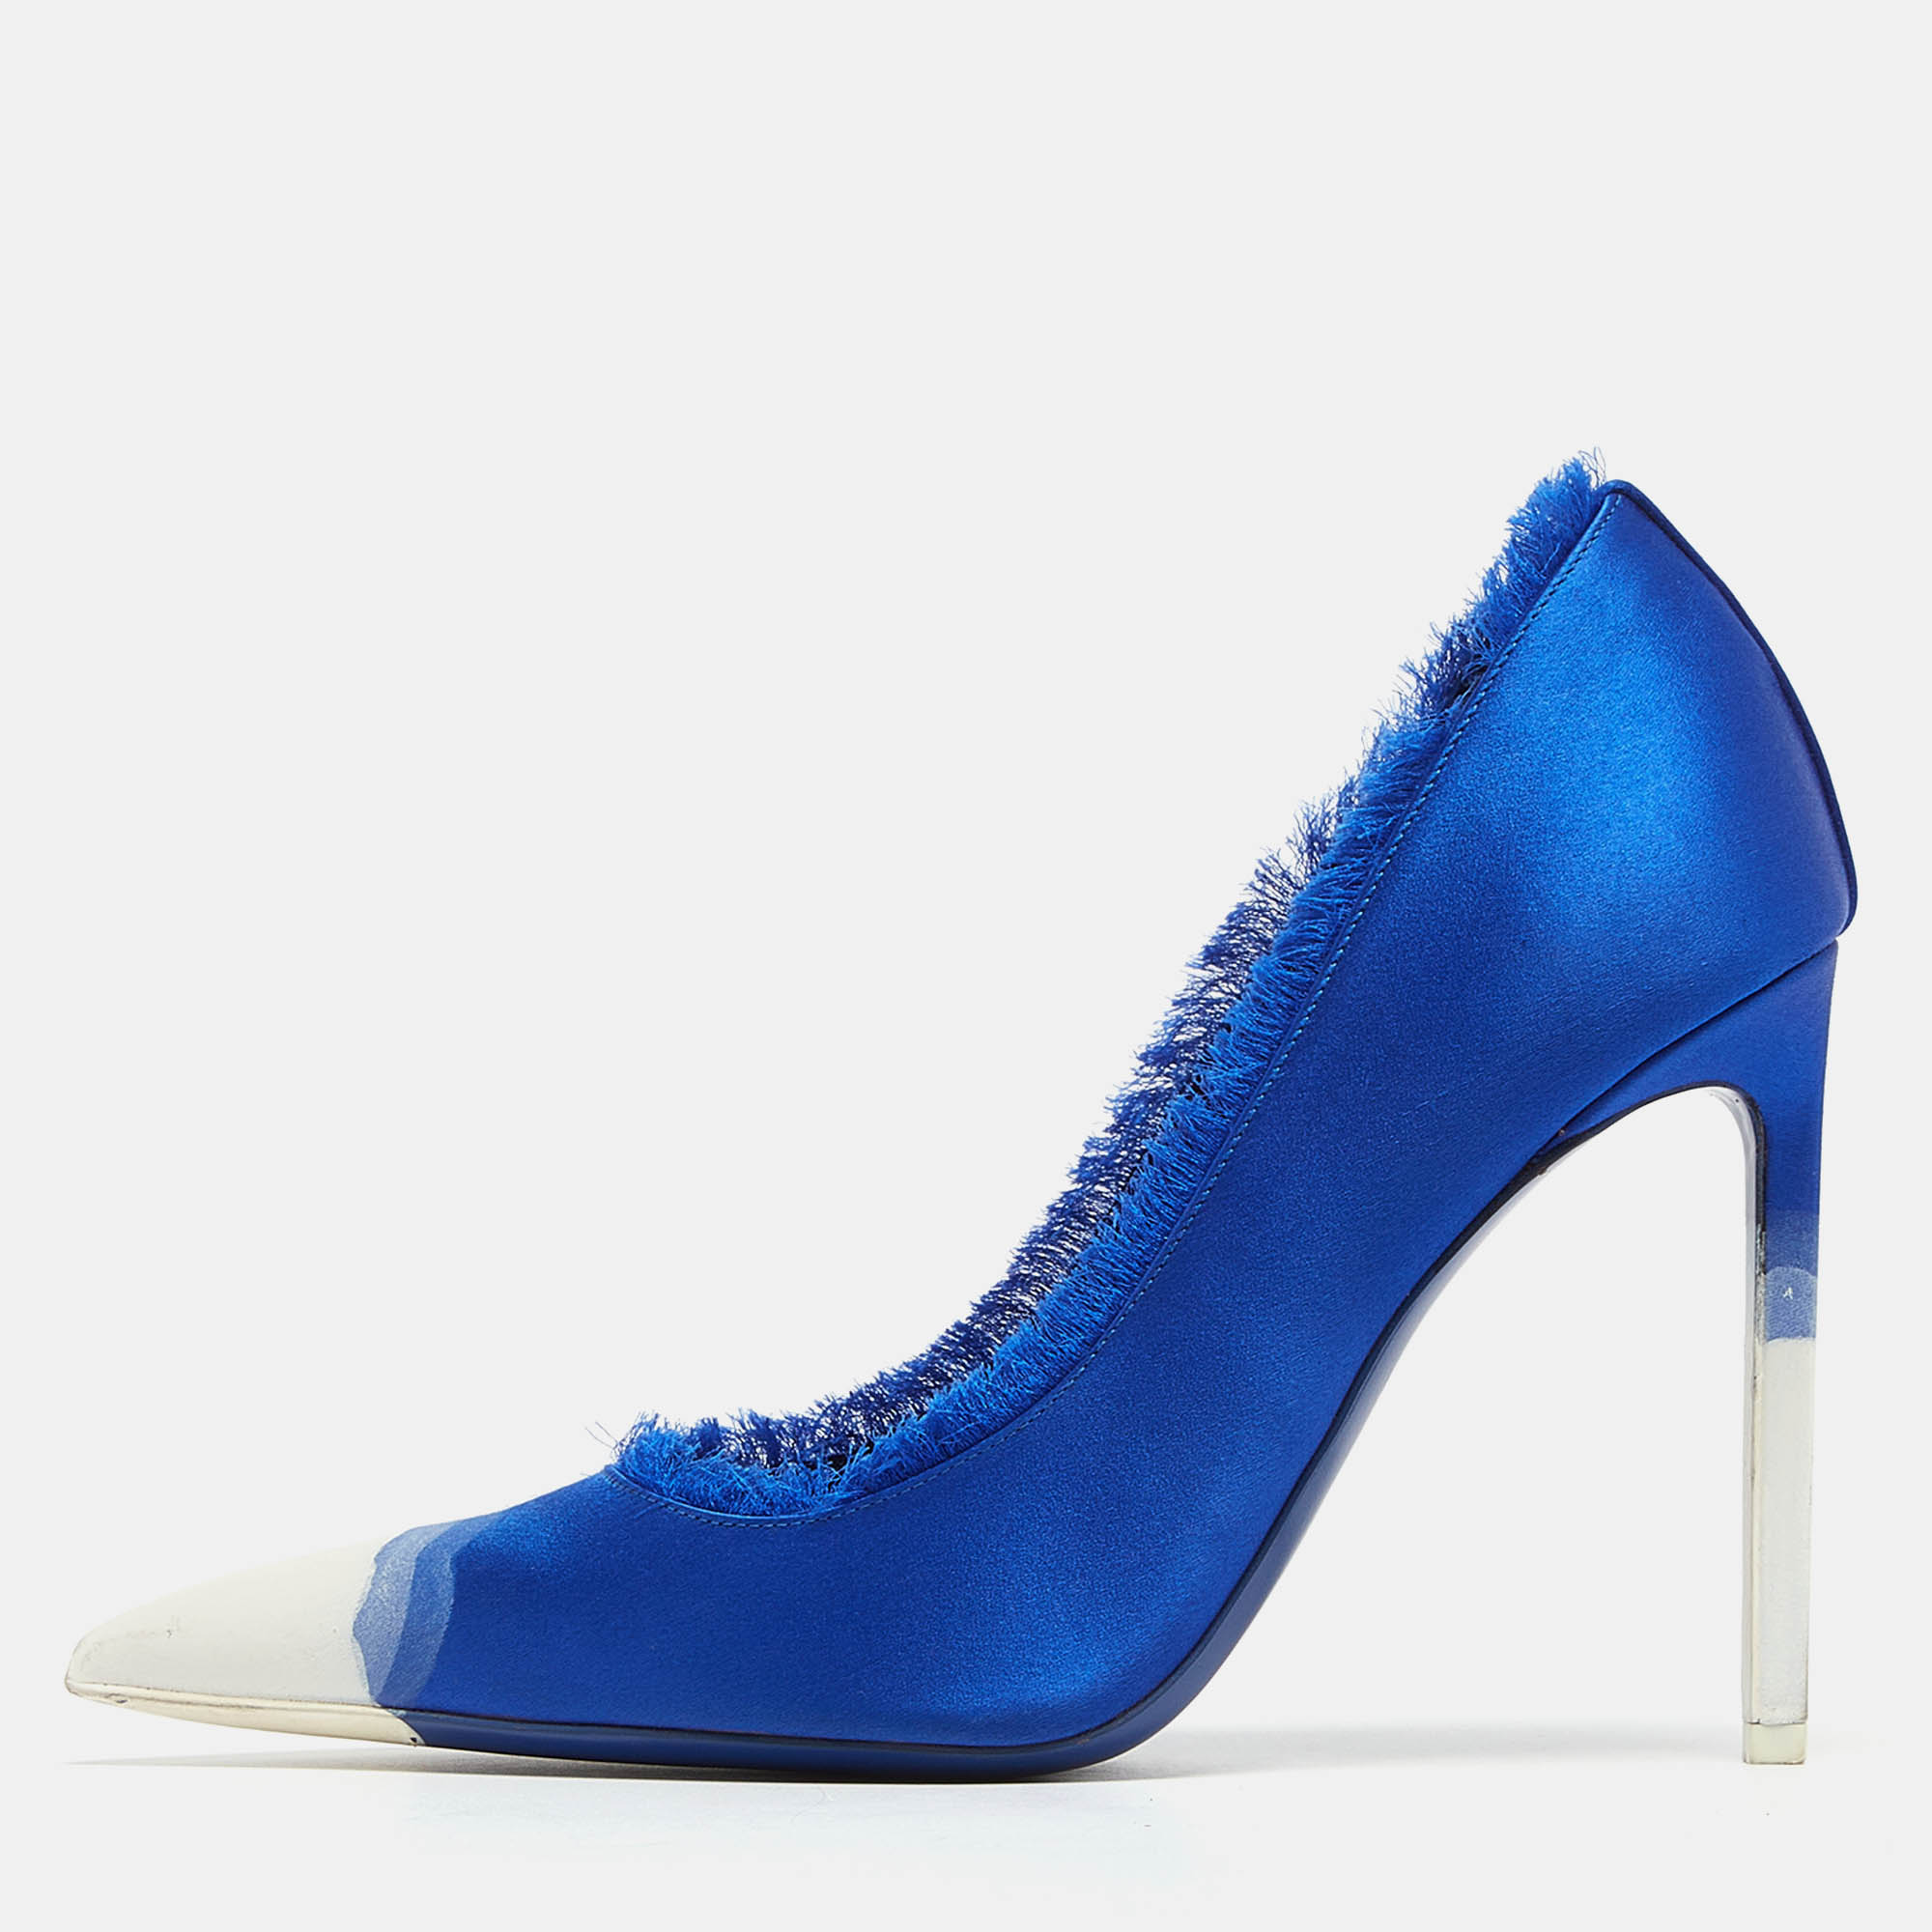 Tom ford blue/white fringed satin pointed toe pumps size 39.5